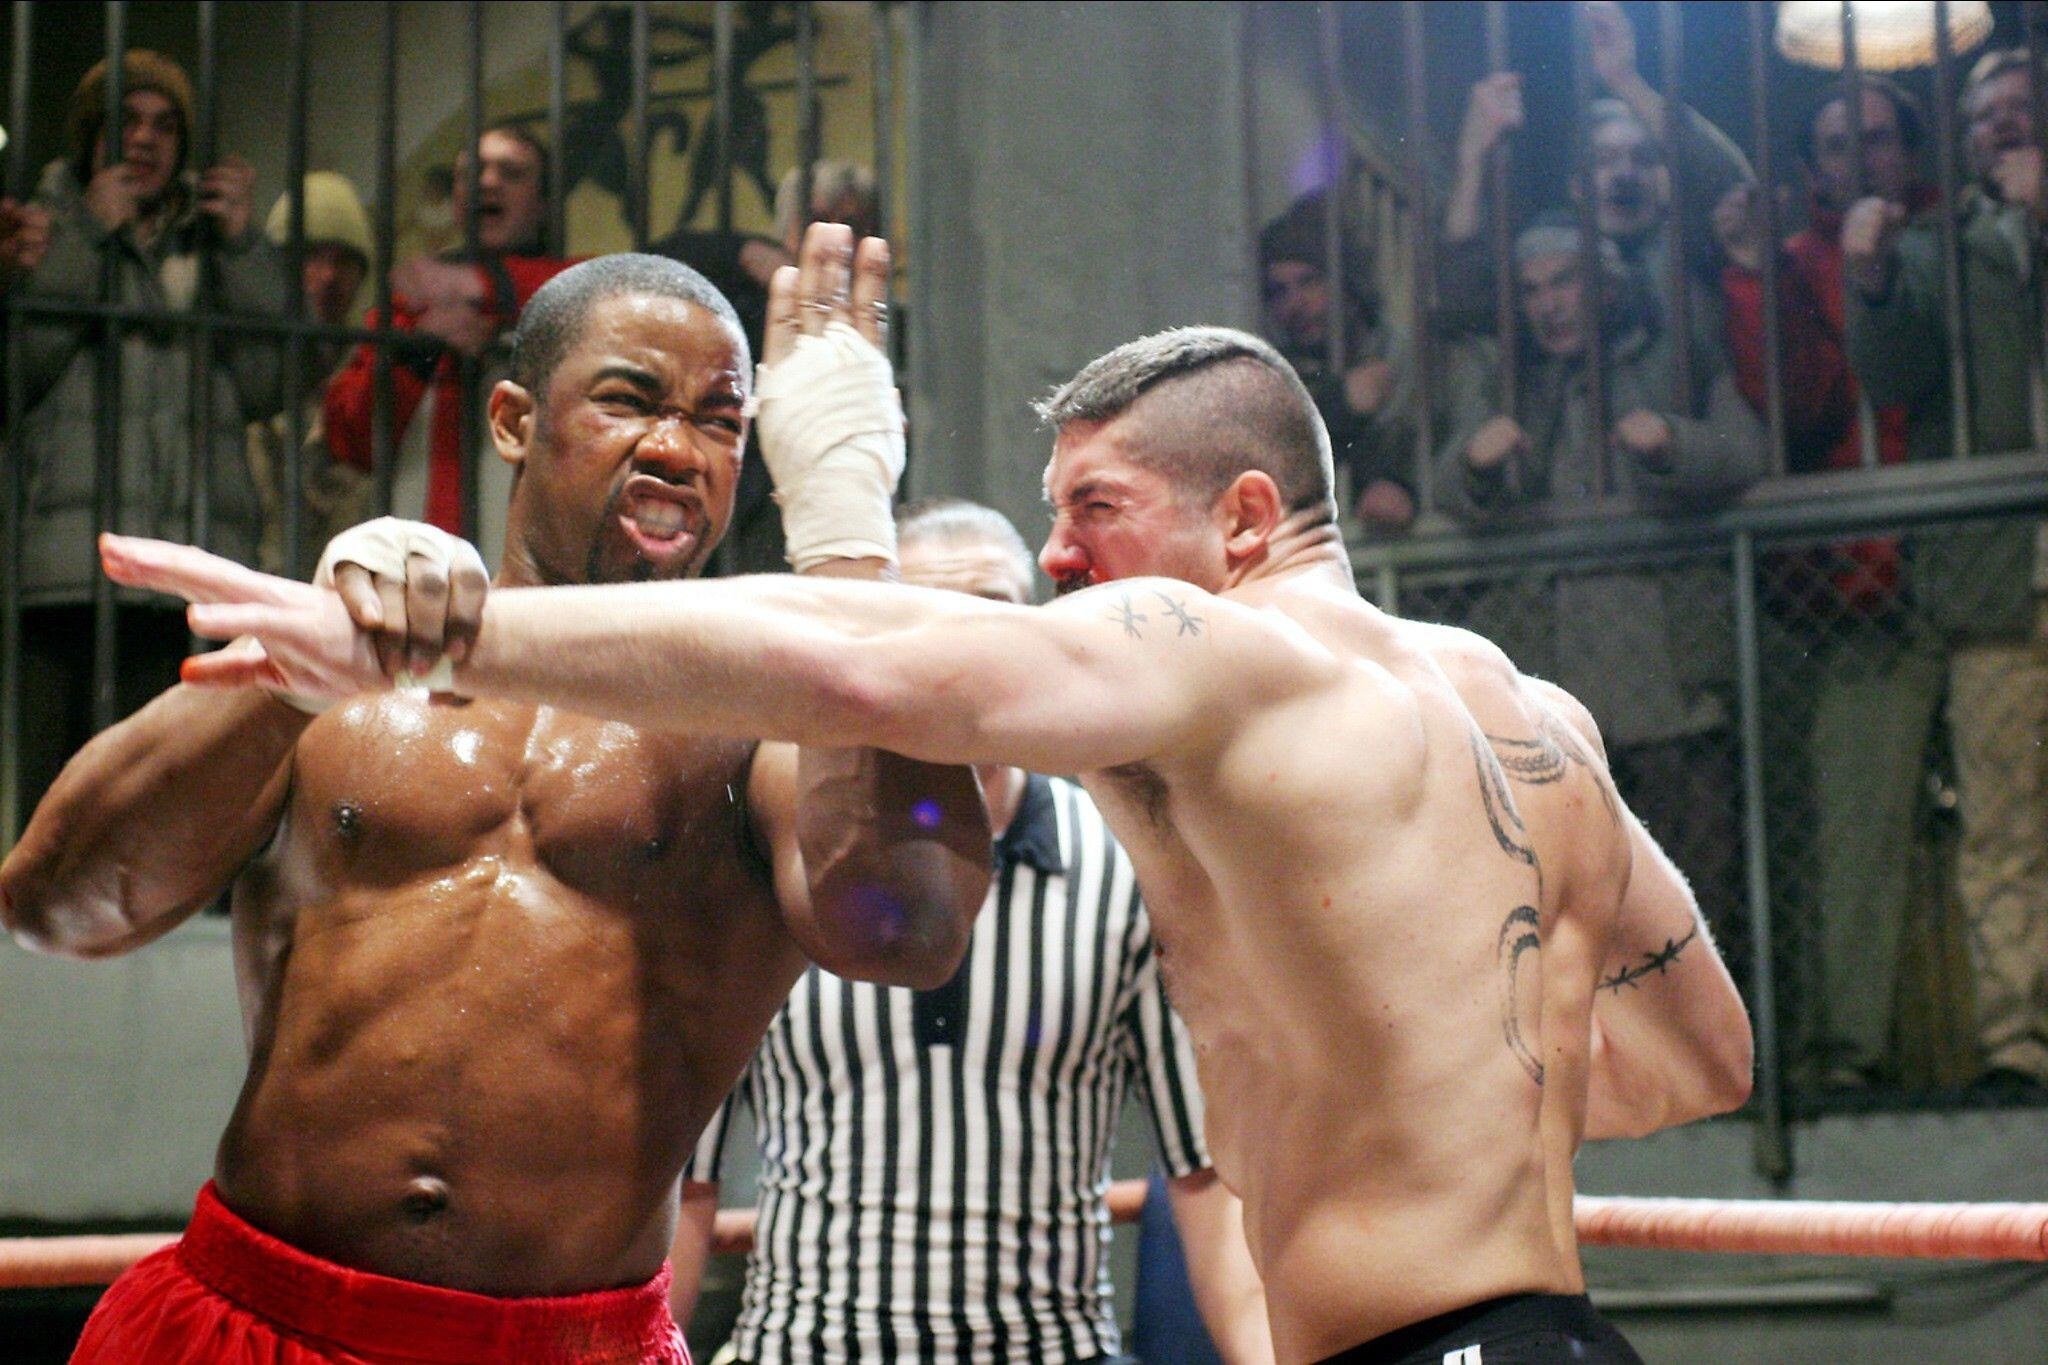 Michael Jai White and Scott Adkins engage in a mixed martial arts fight in prison